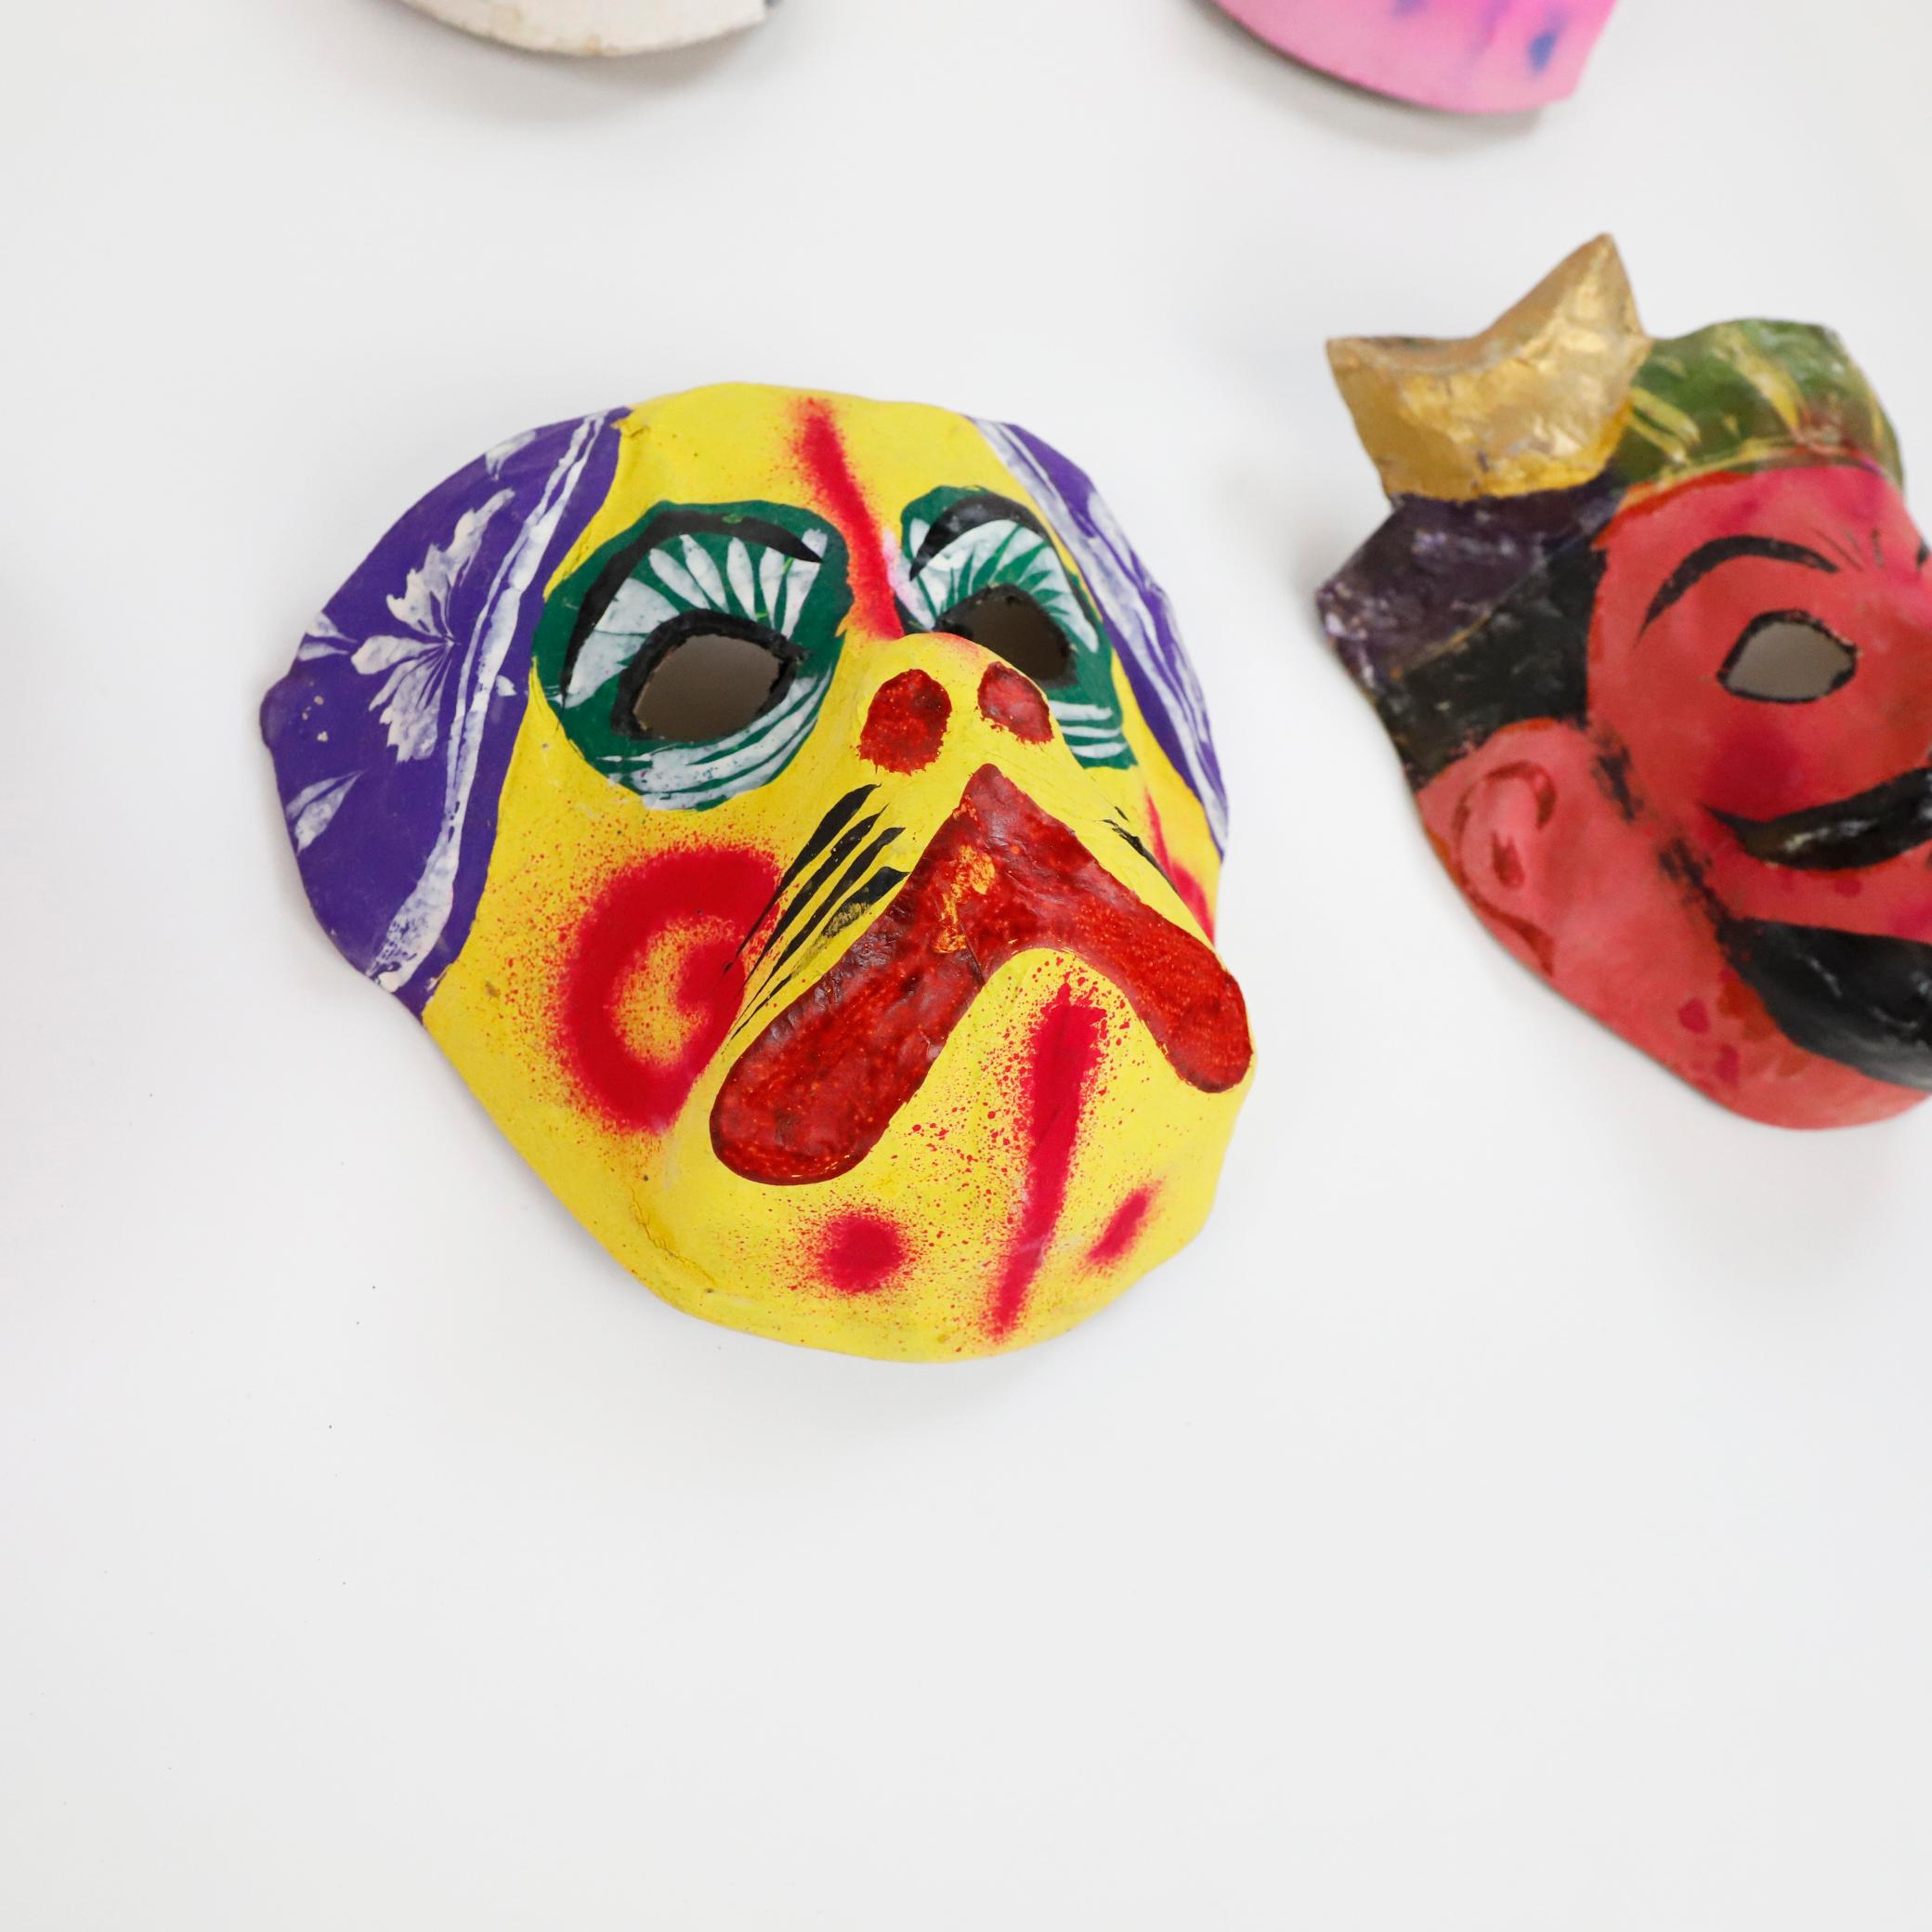 Circa 1960. We offer this antique set of 8 Mexican papier-mâché masks 100% handmade and paited with anilina (natural pigments).